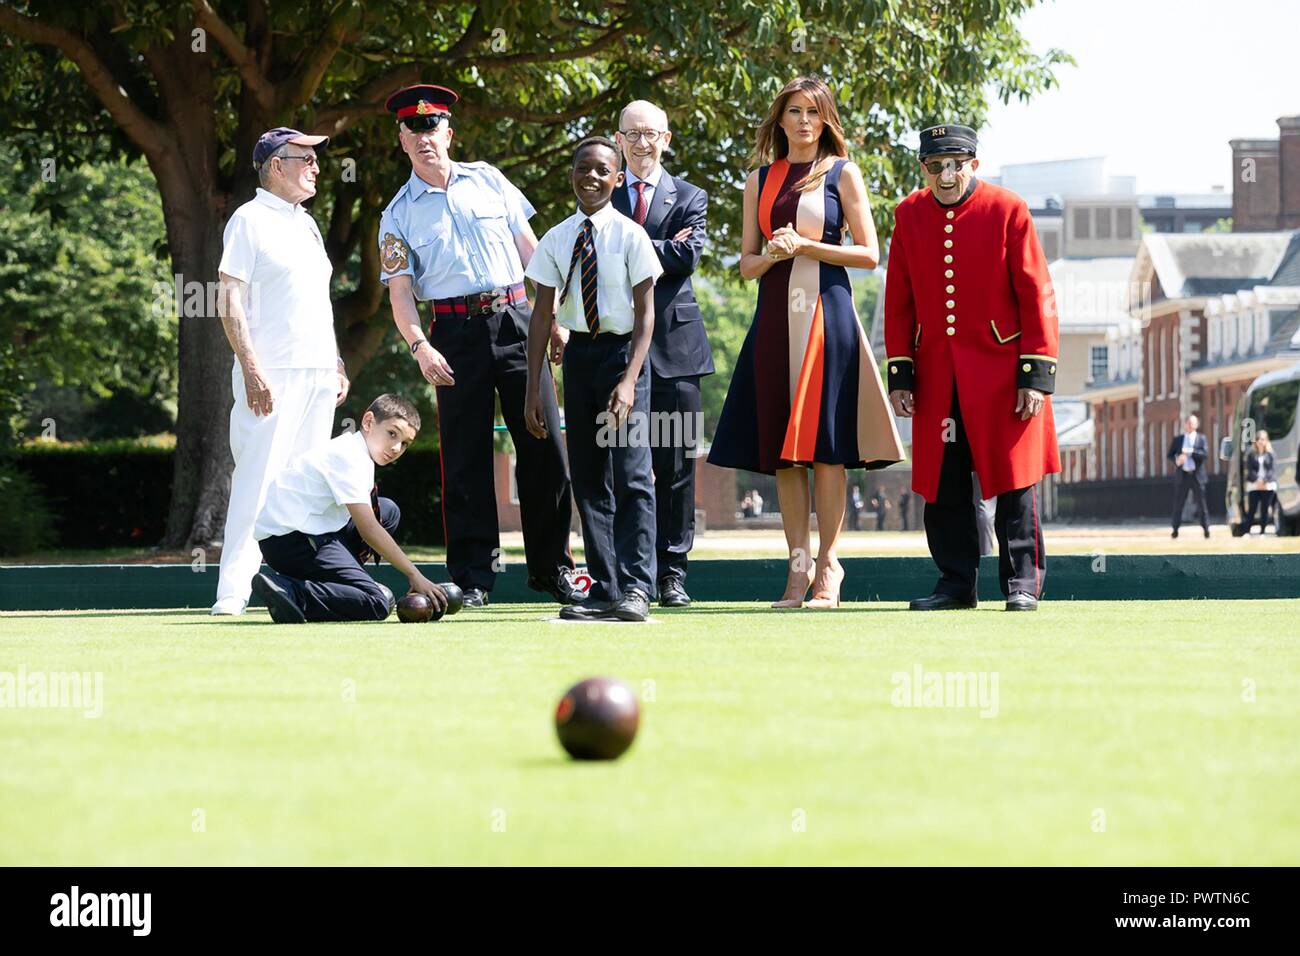 U.S First Lady Melania Trump and Philip May, husband of British Prime Minister Theresa May, try their hand at bowls during a visit to the Royal Hospital Chelsea July 13, 2018 in London, United Kingdom. Stock Photo